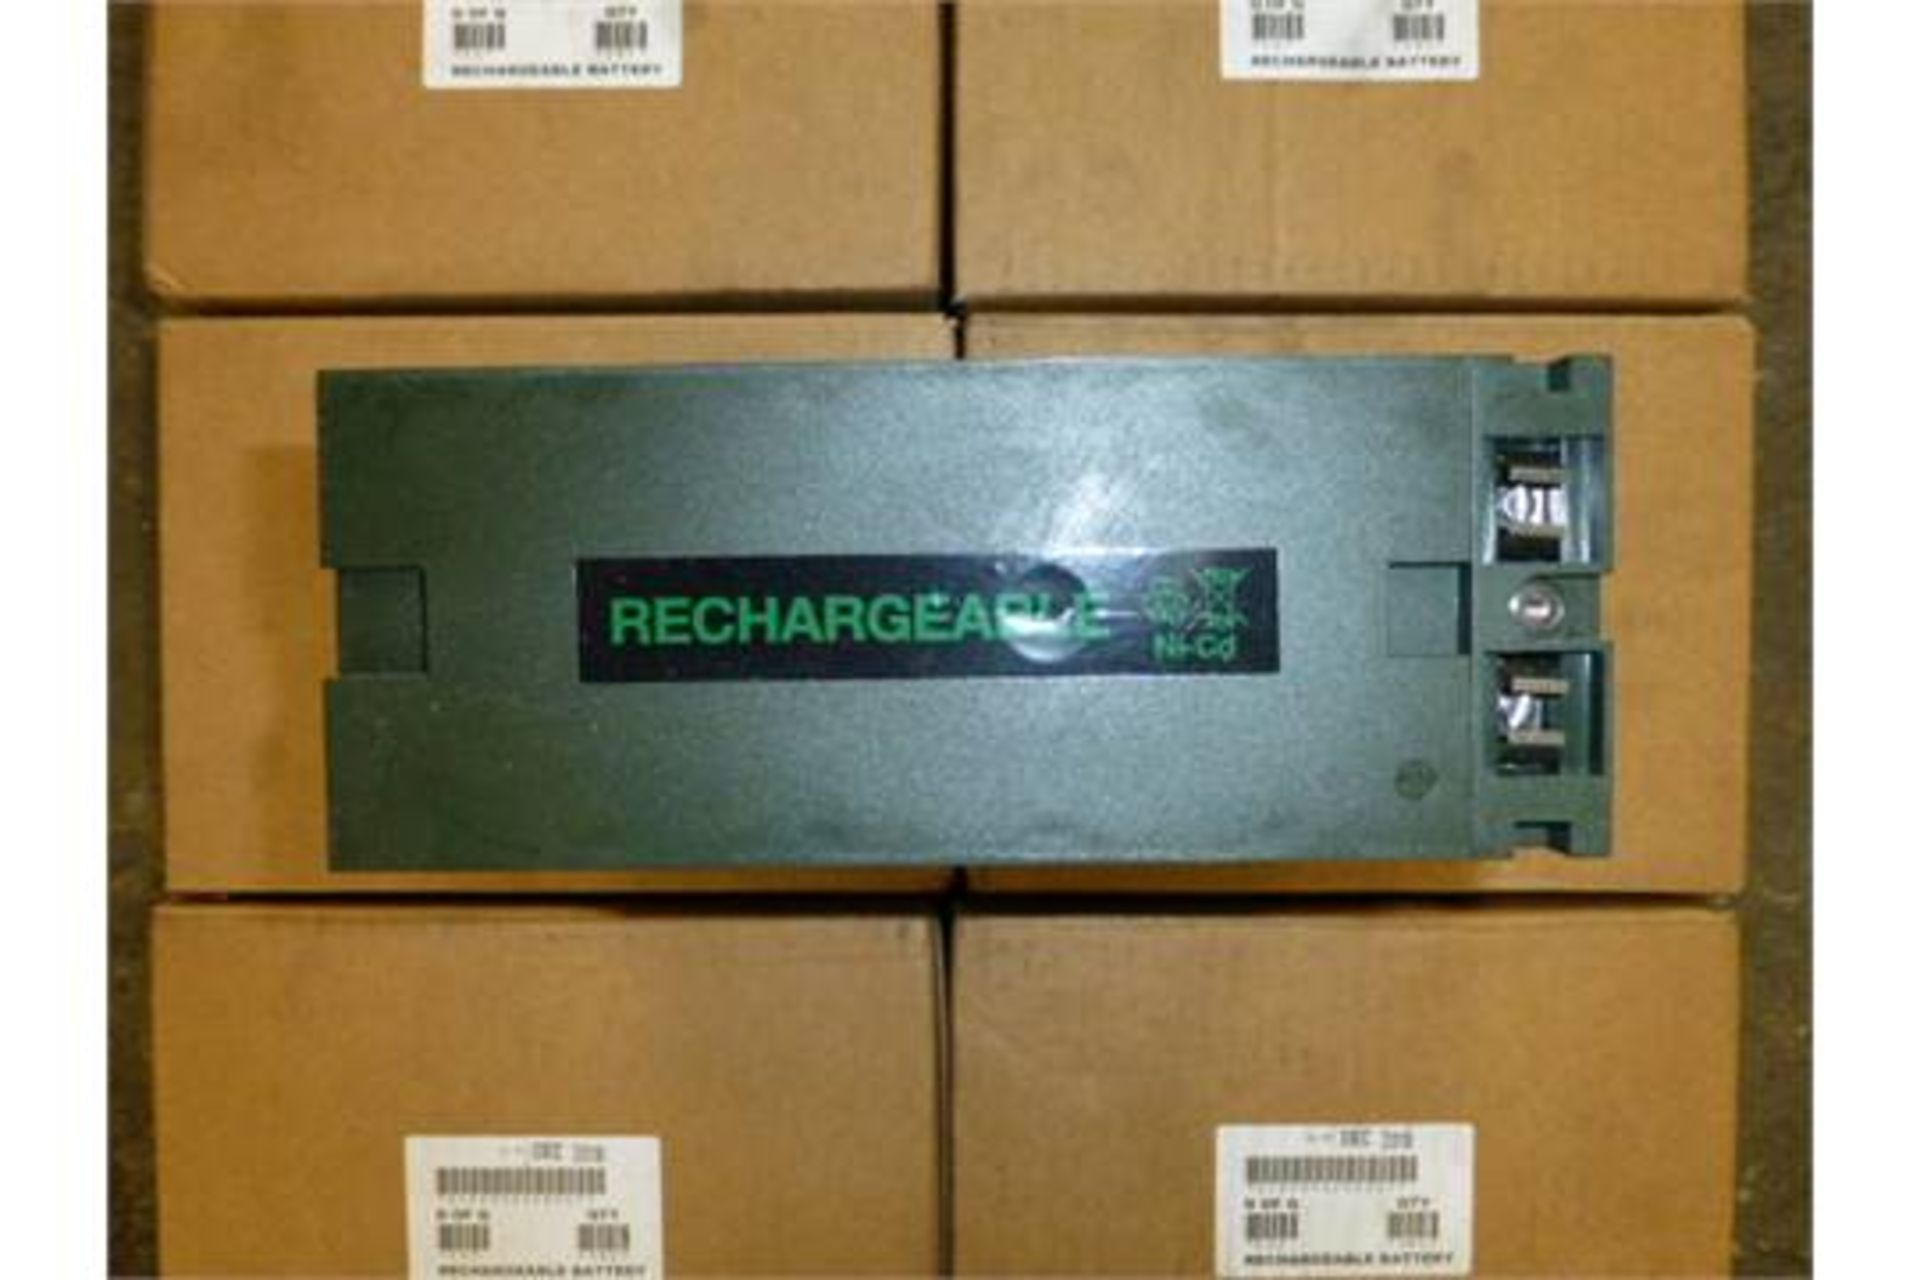 10 x Clansman Rechargeable Batteries - Image 2 of 5